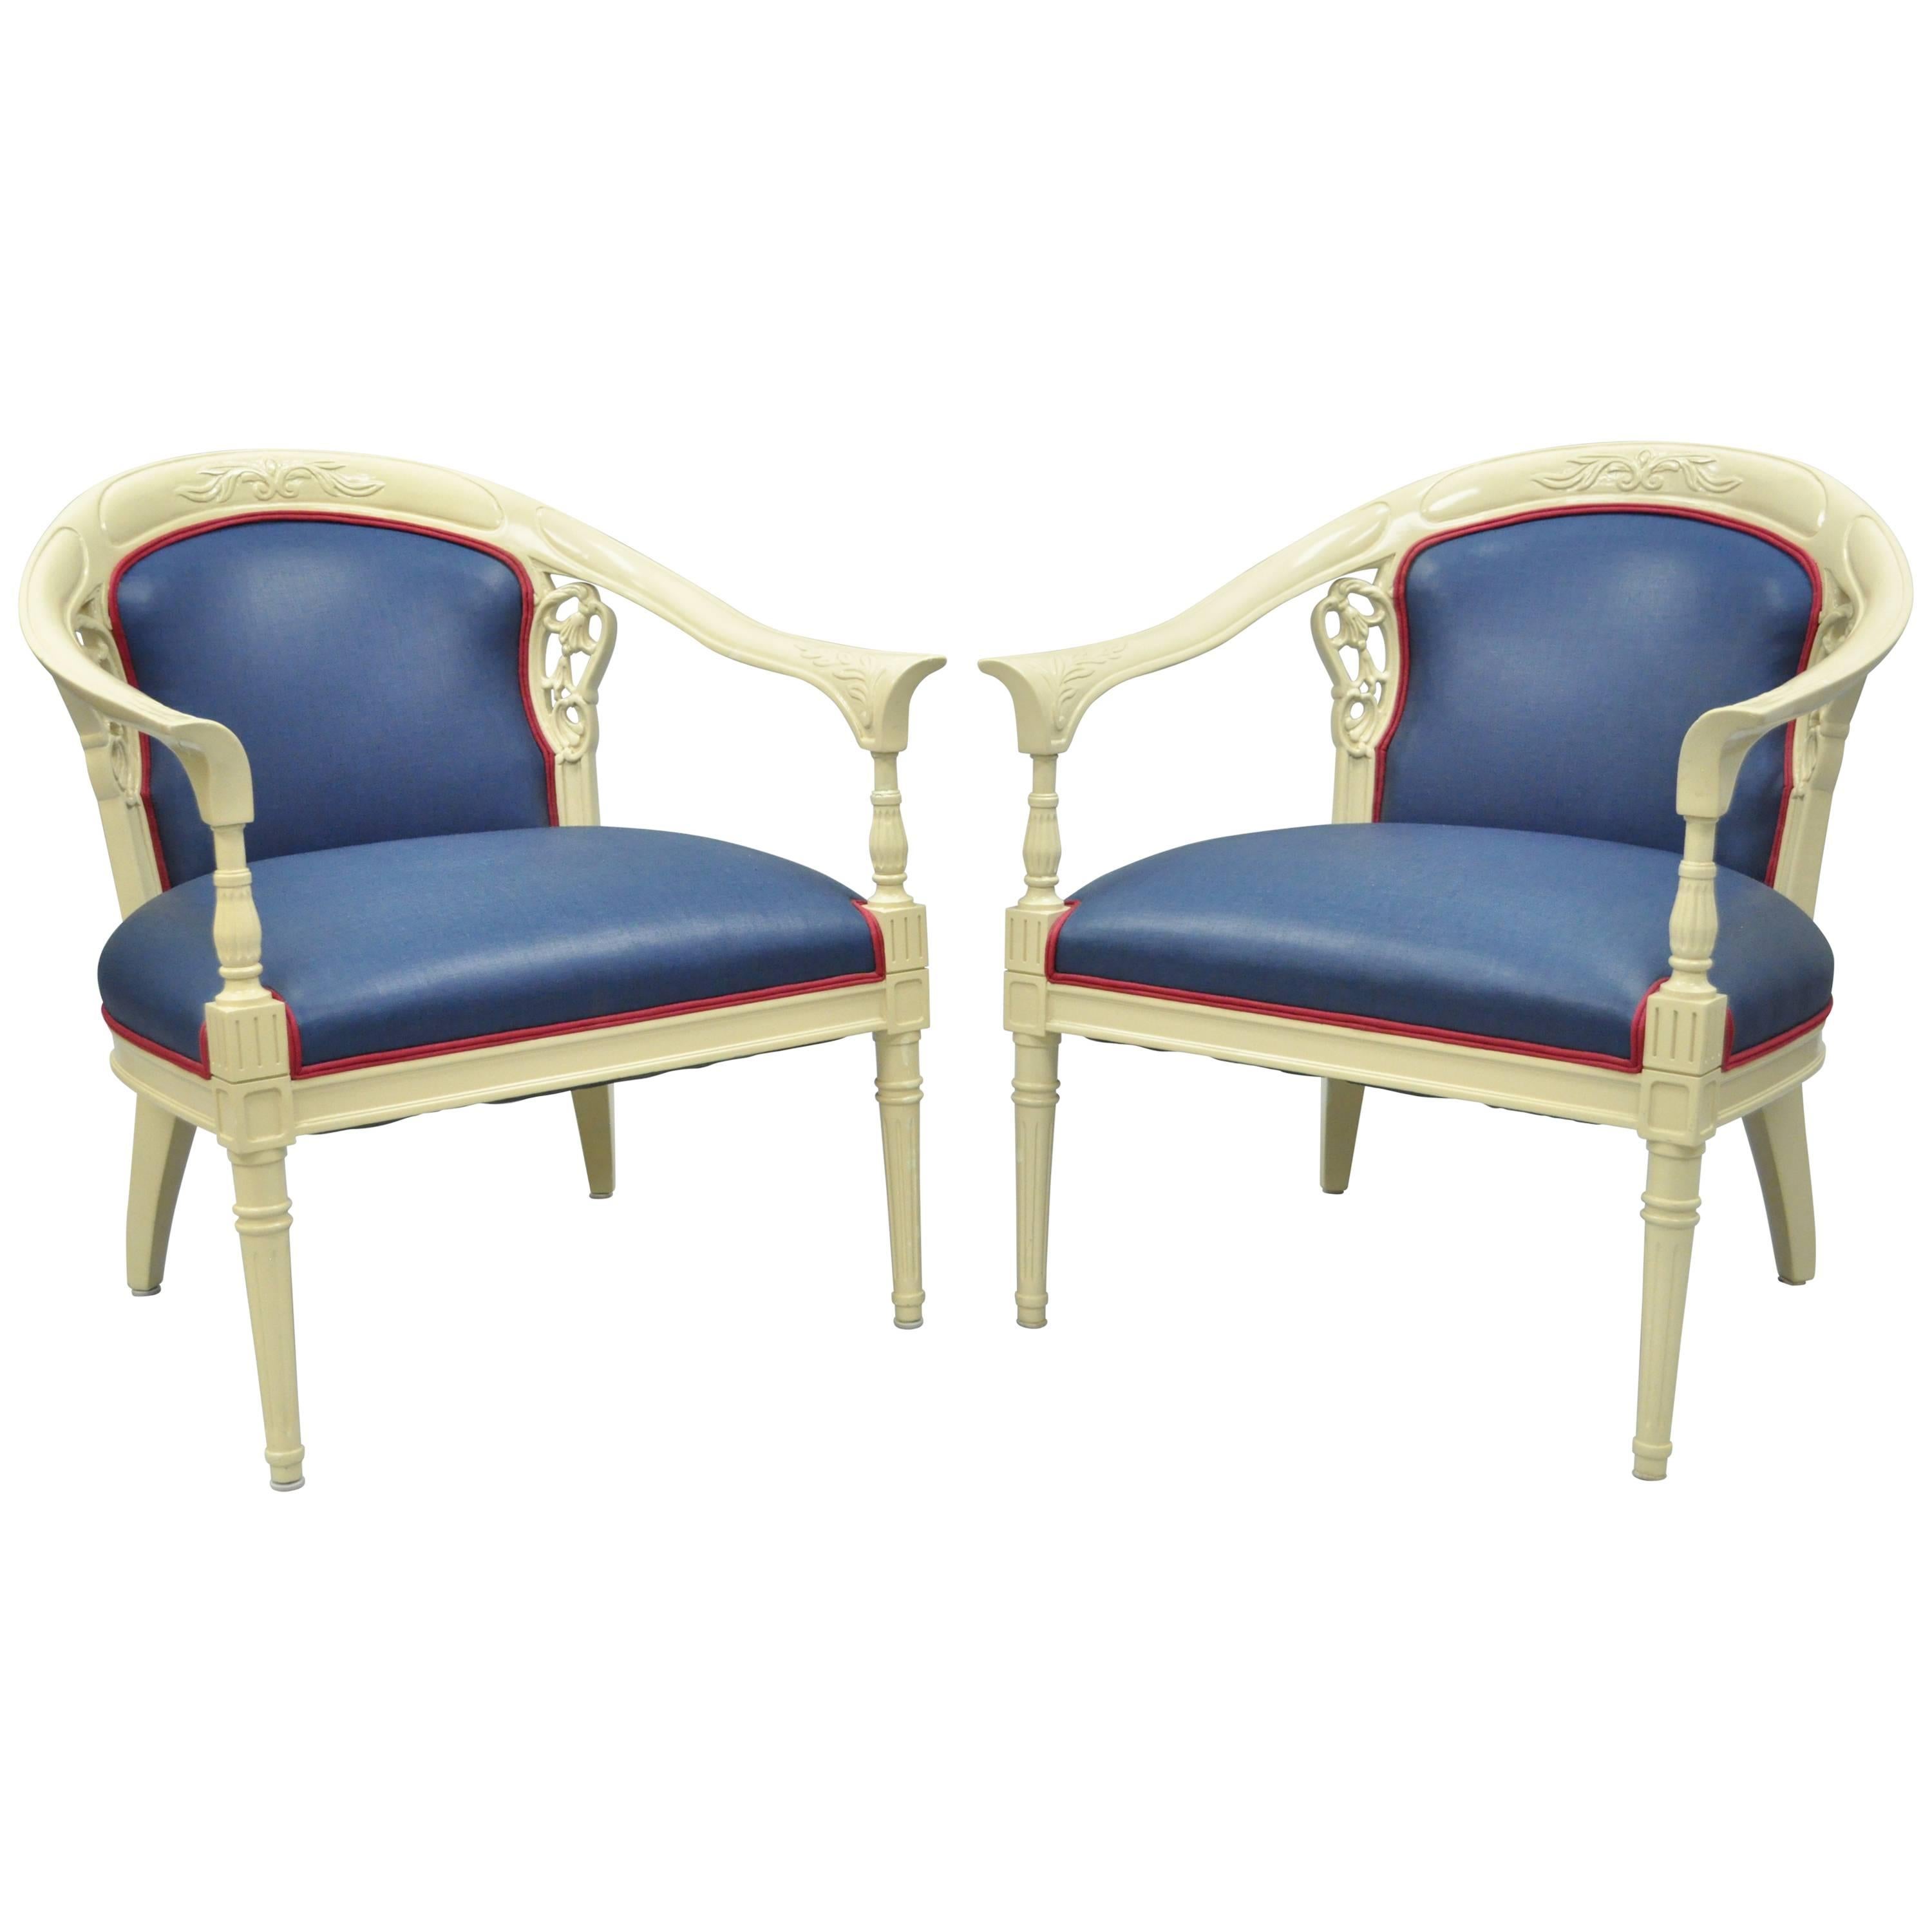 Pair of Cream Lacquered Chinoiserie Blue Barrel Back Lounge Club Arm Chairs